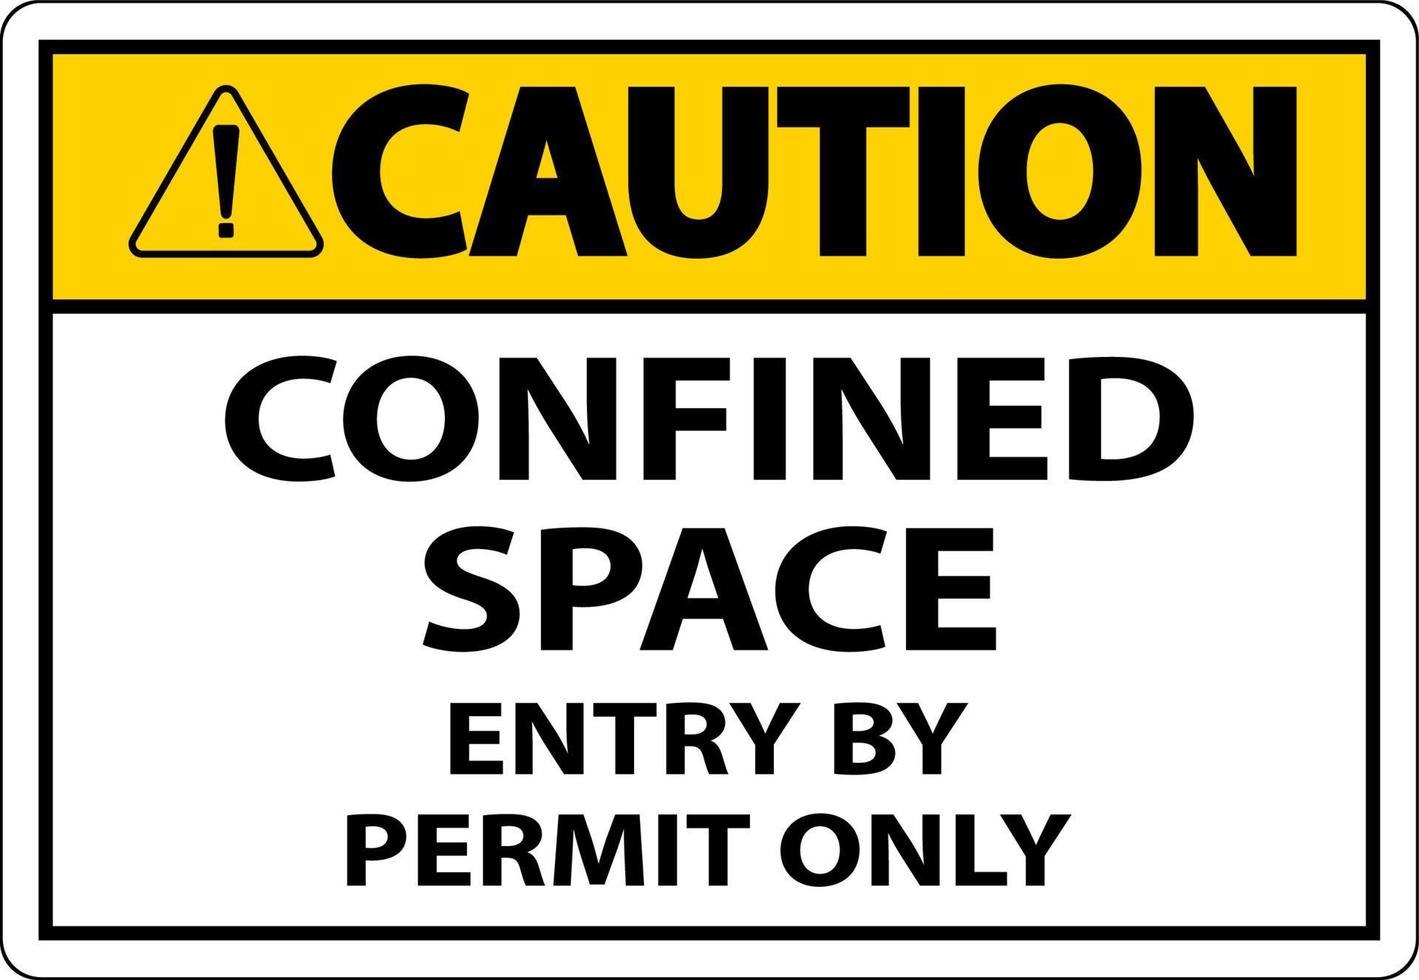 Caution Confined Space Entry By Permit Only Sign vector